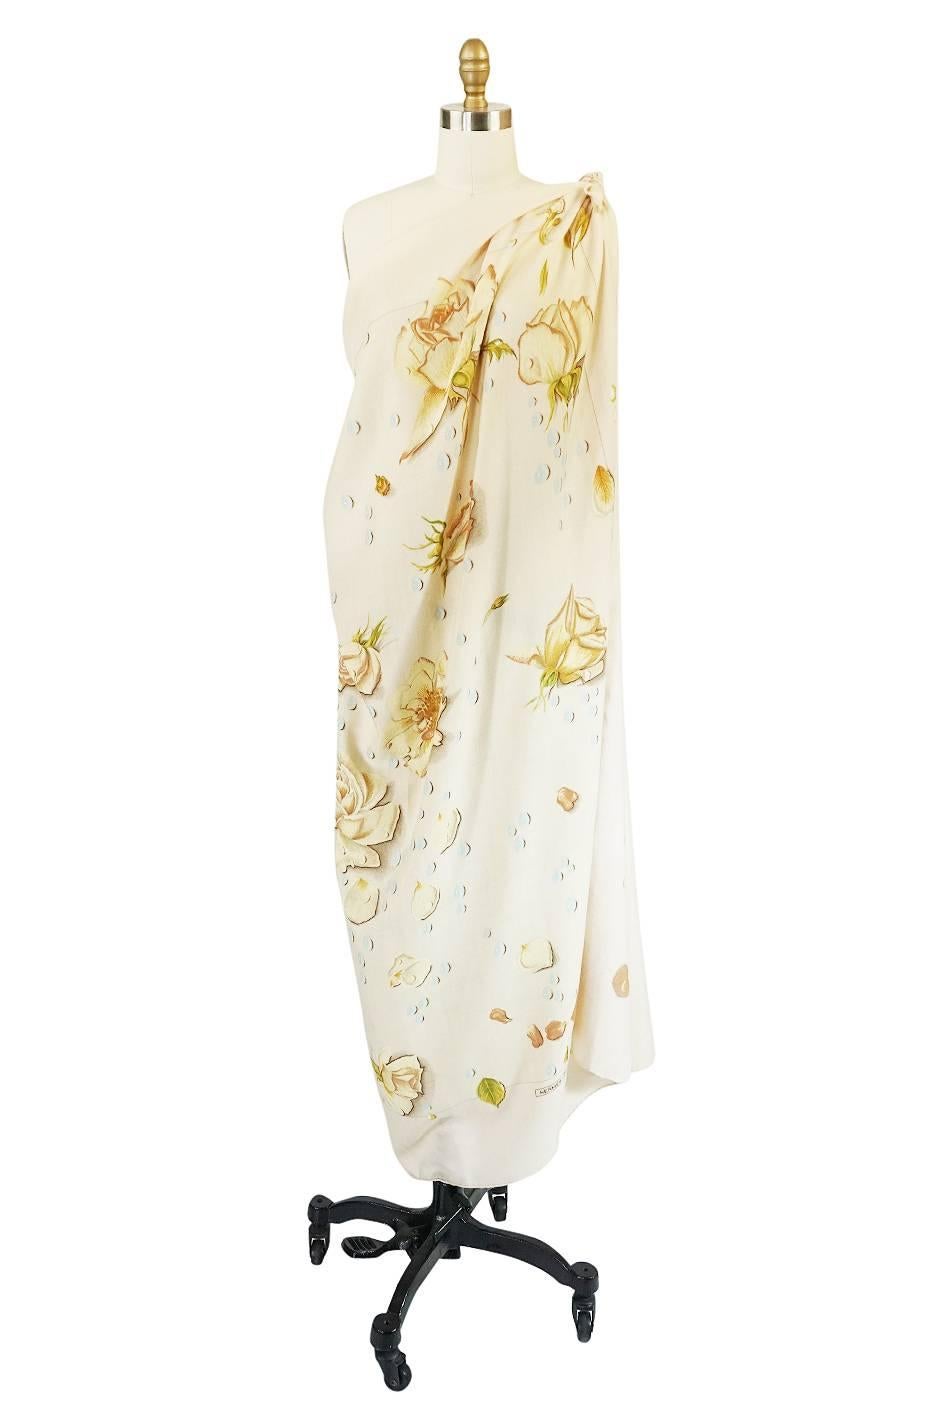 

Beautiful cashmere and silk travel shawl by Hermes that depicts a stunning and romantic  pattern of flowers, leafs and water drops on a muted cream backdrop. These are fabulous to travel with as they are light and warm but fold up quite small.